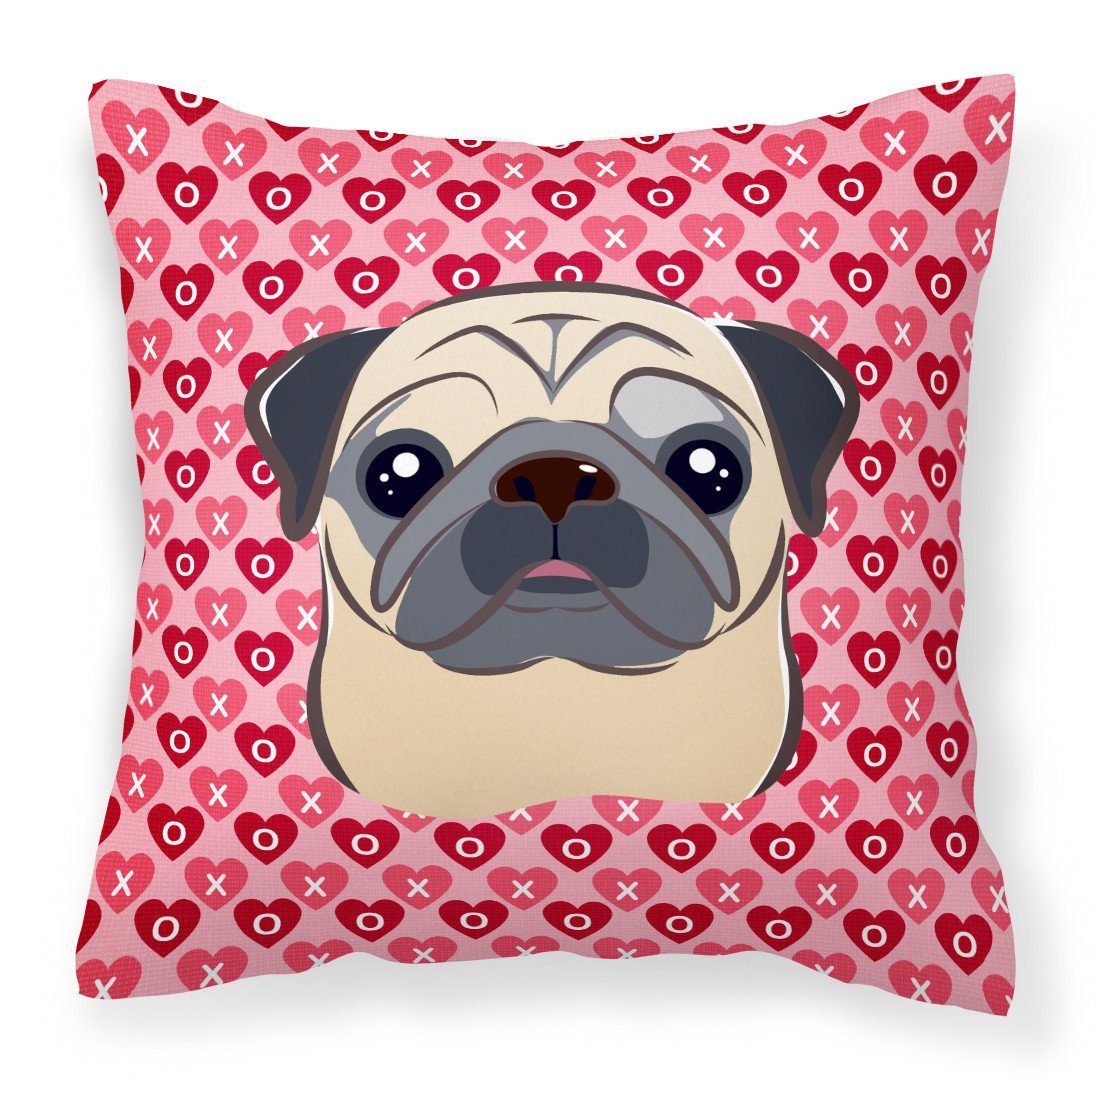 Fawn Pug Hearts Fabric Decorative Pillow BB5332PW1818 by Caroline's Treasures